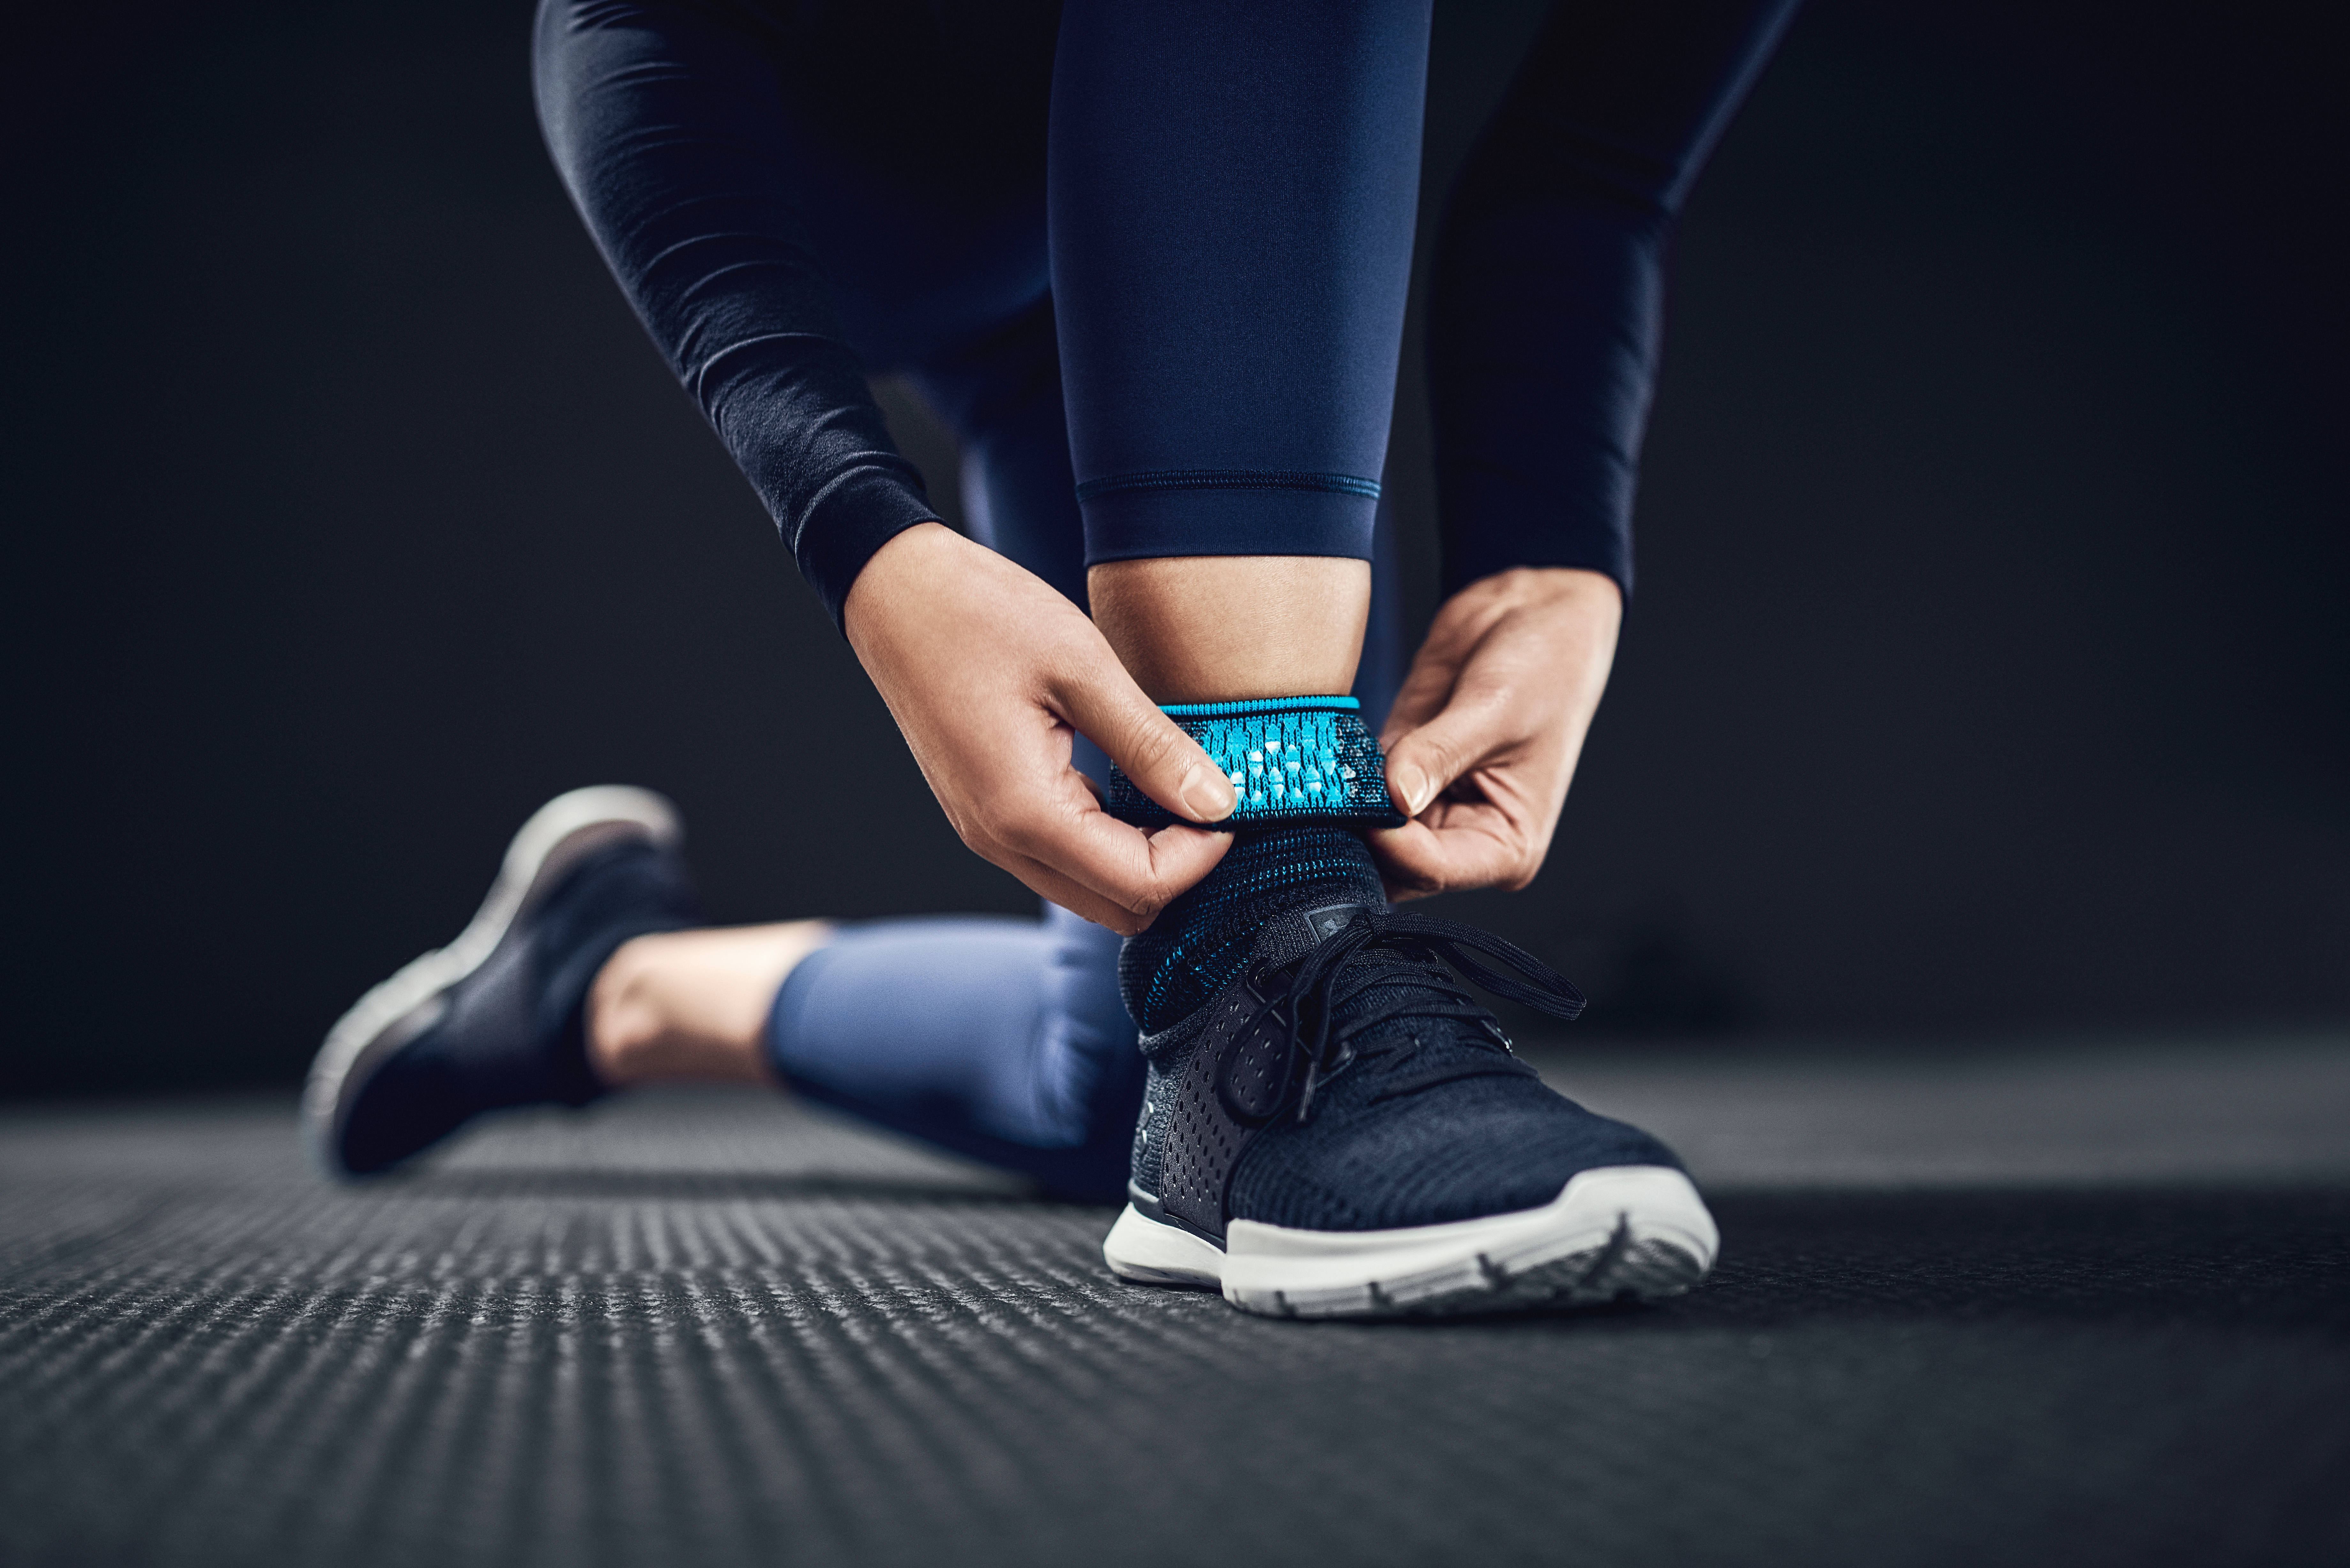 Formfit® Braces—Ultimate in Breathable Support Technology.